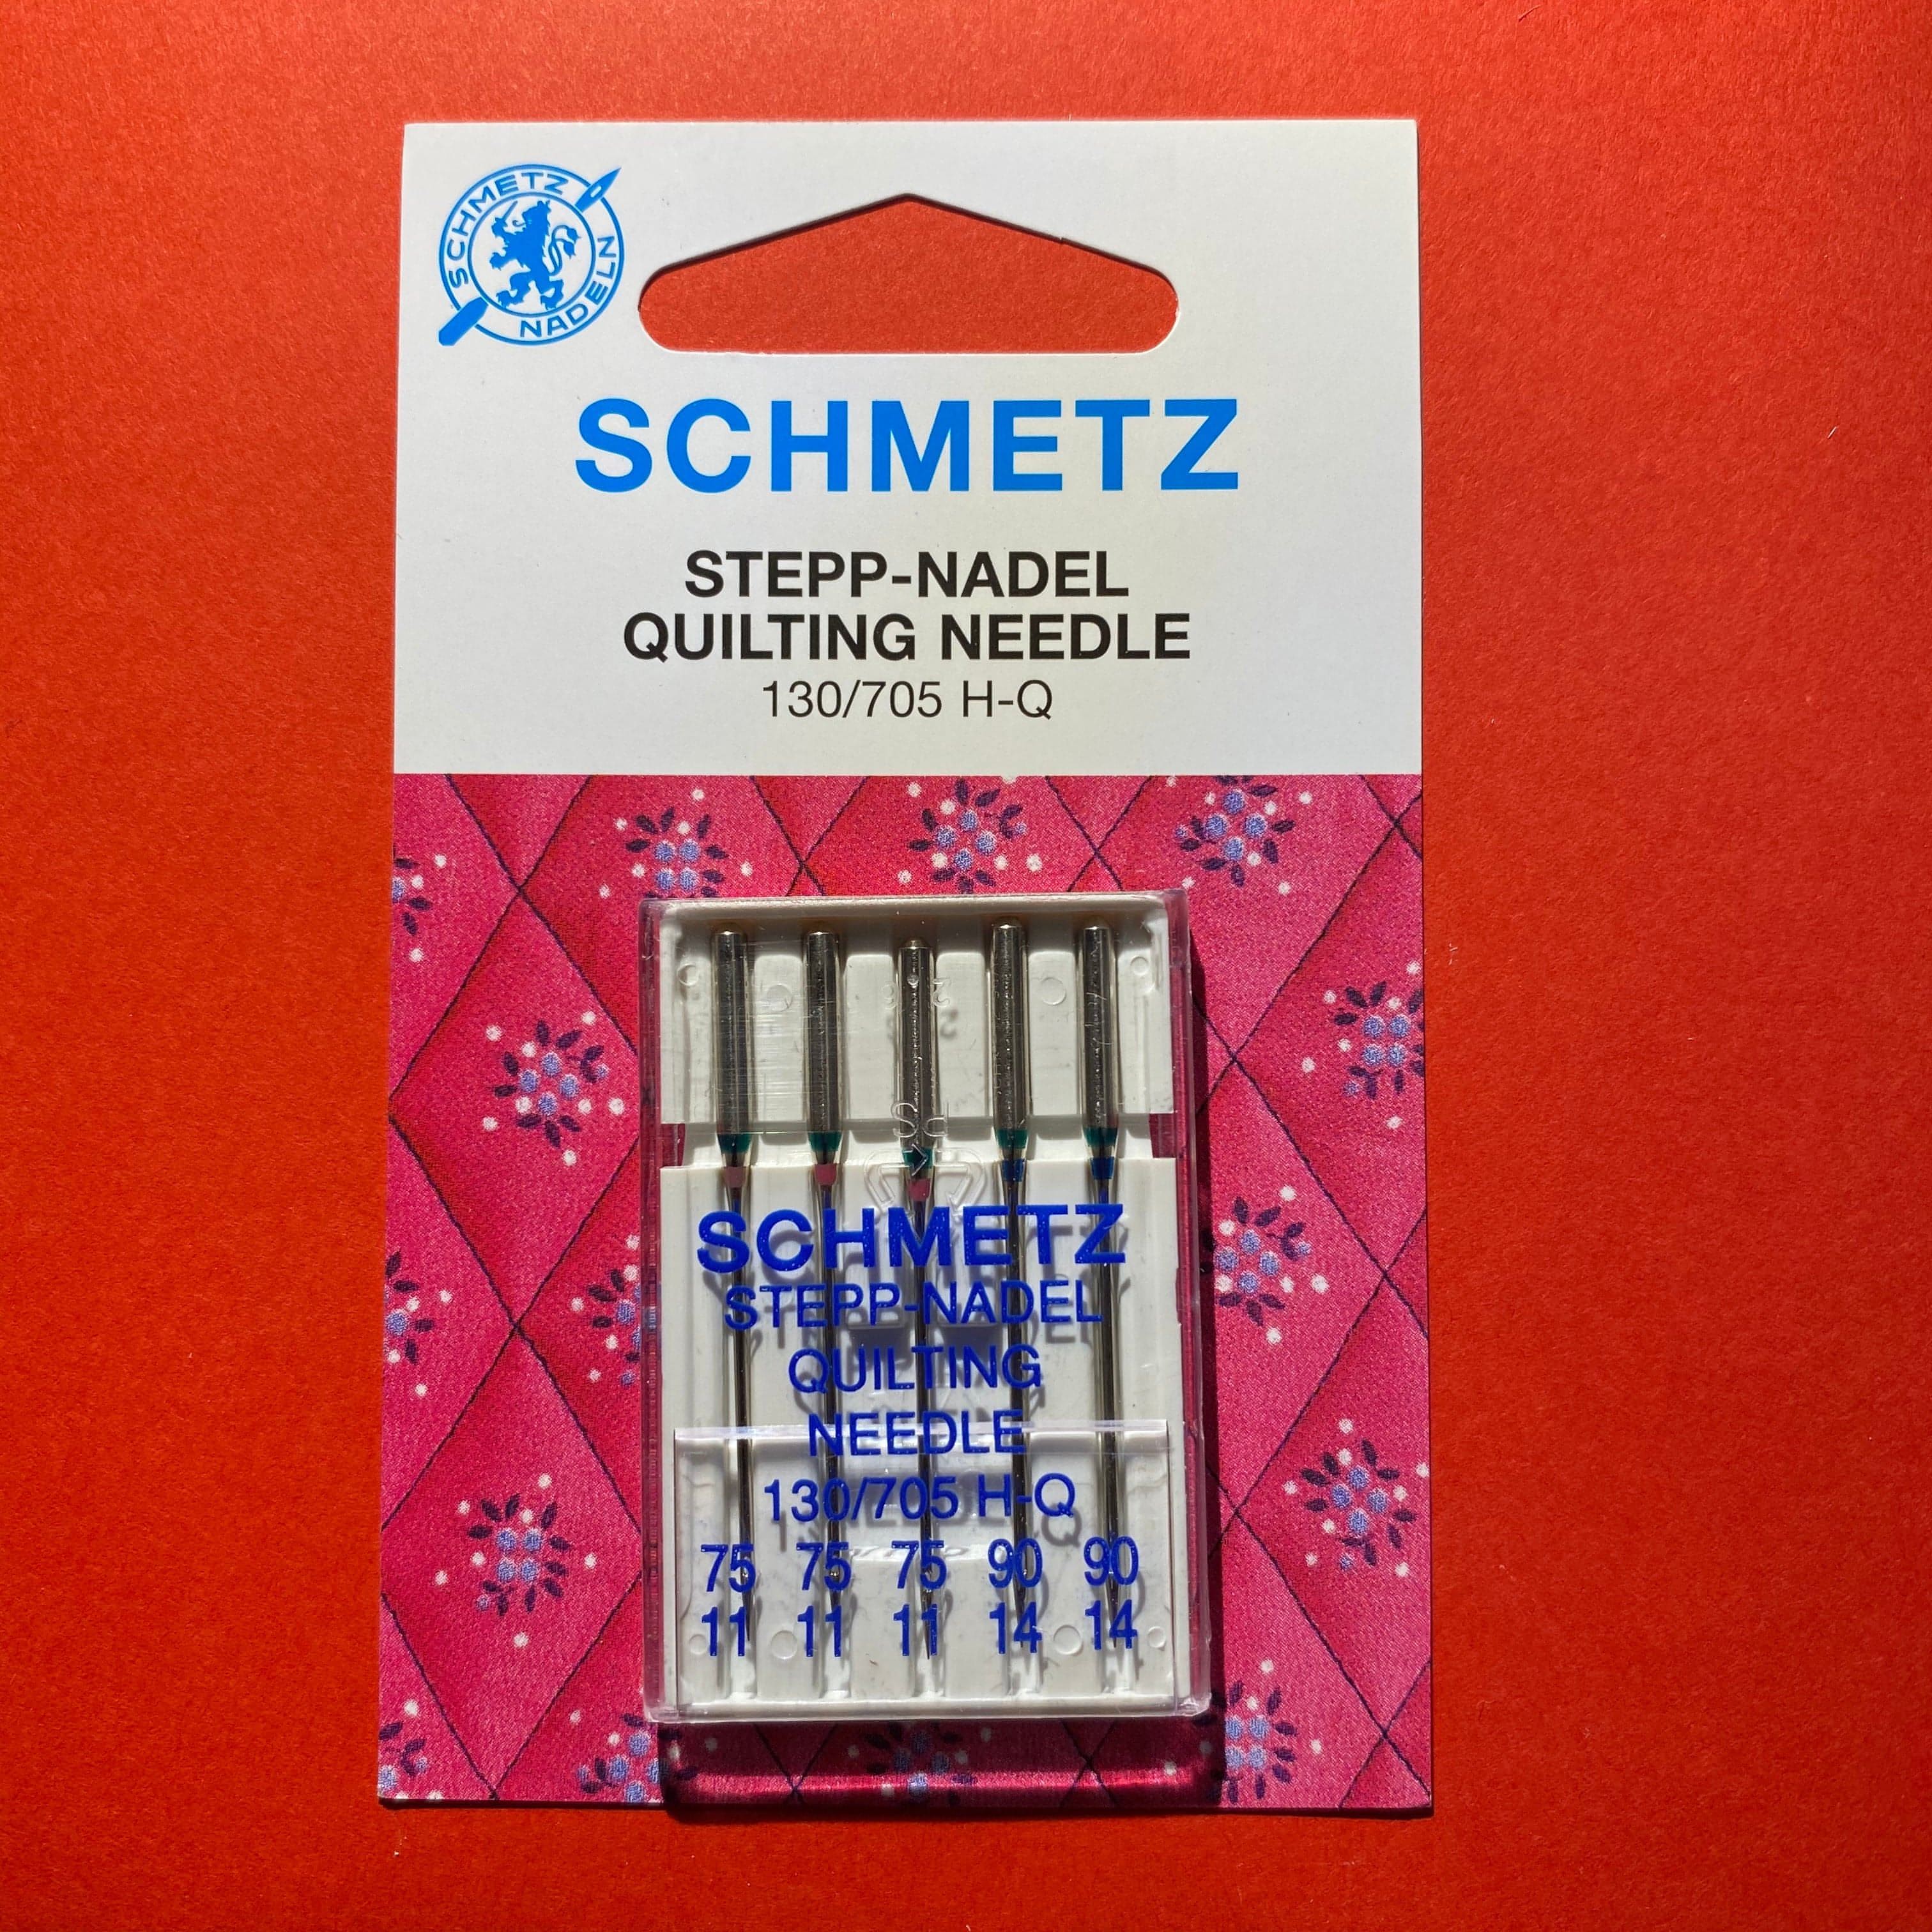 Schmetz Quilting Needles 130/705 H-Q 75/11 and 90/14 - 5 pack